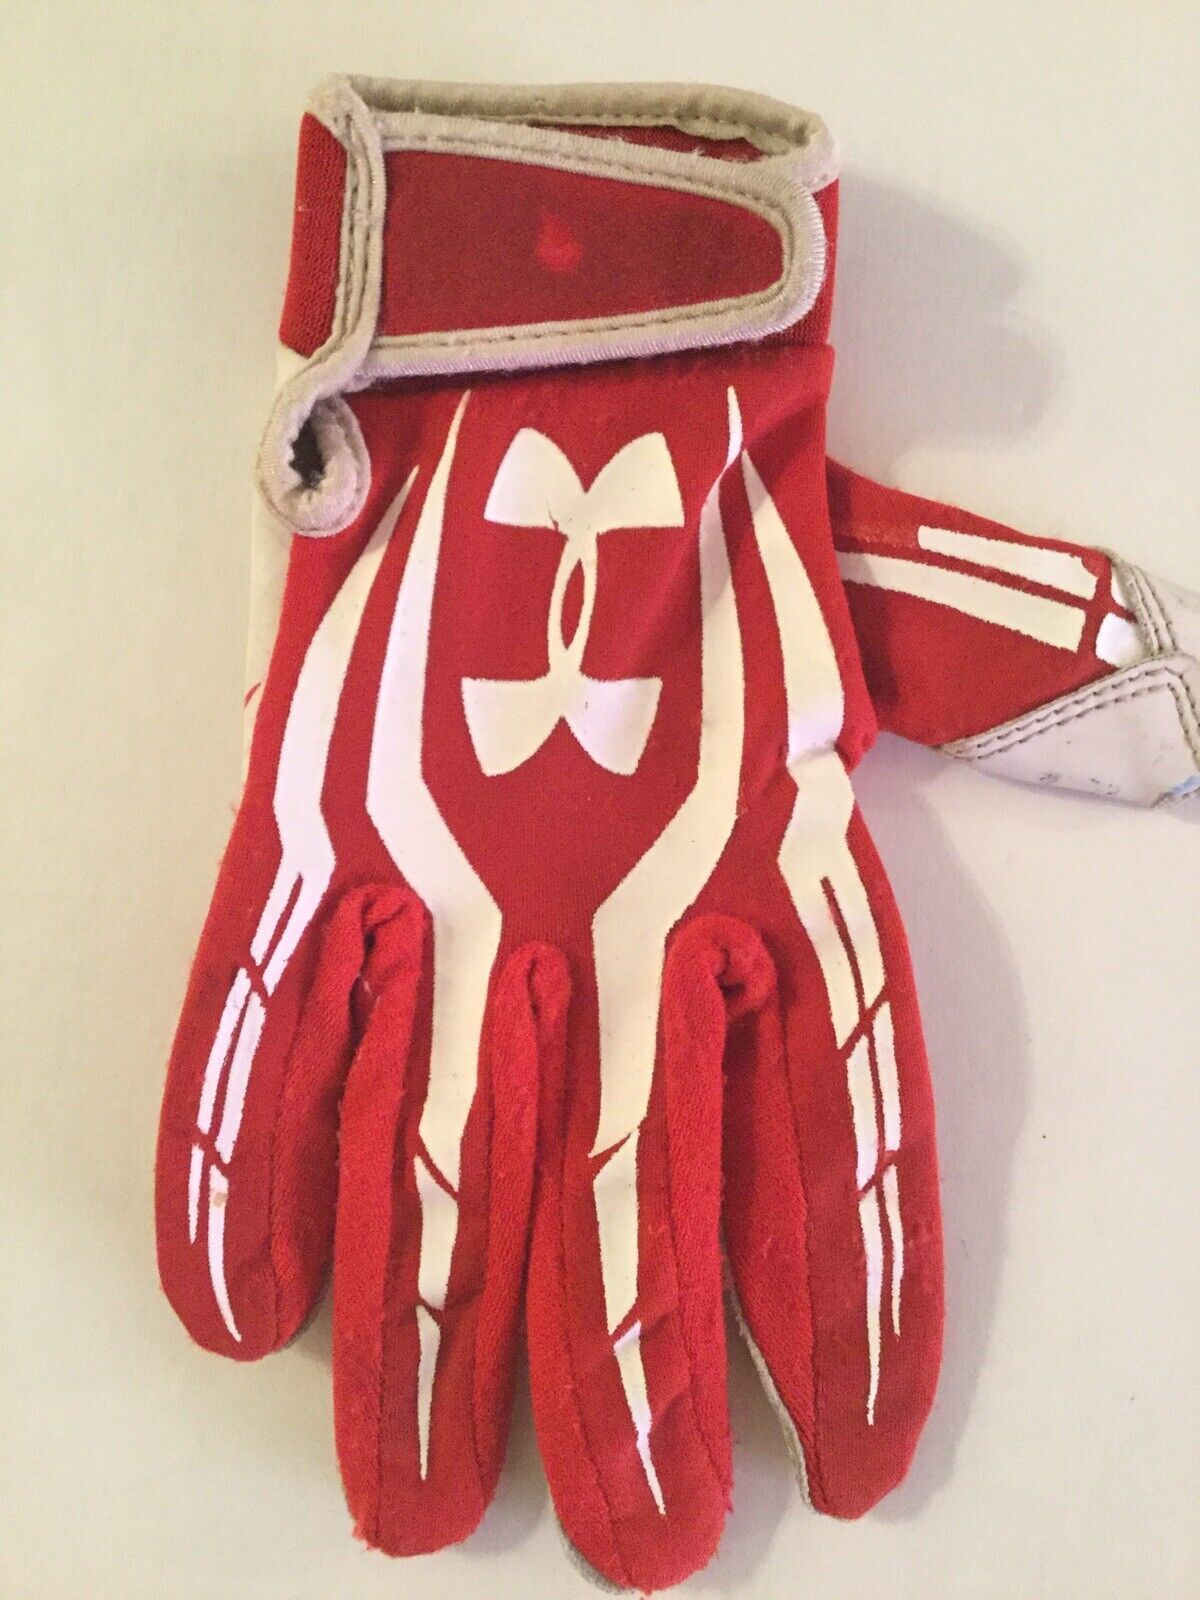 1 Under Armour glove youth size S/M single right hand red white - $6.59